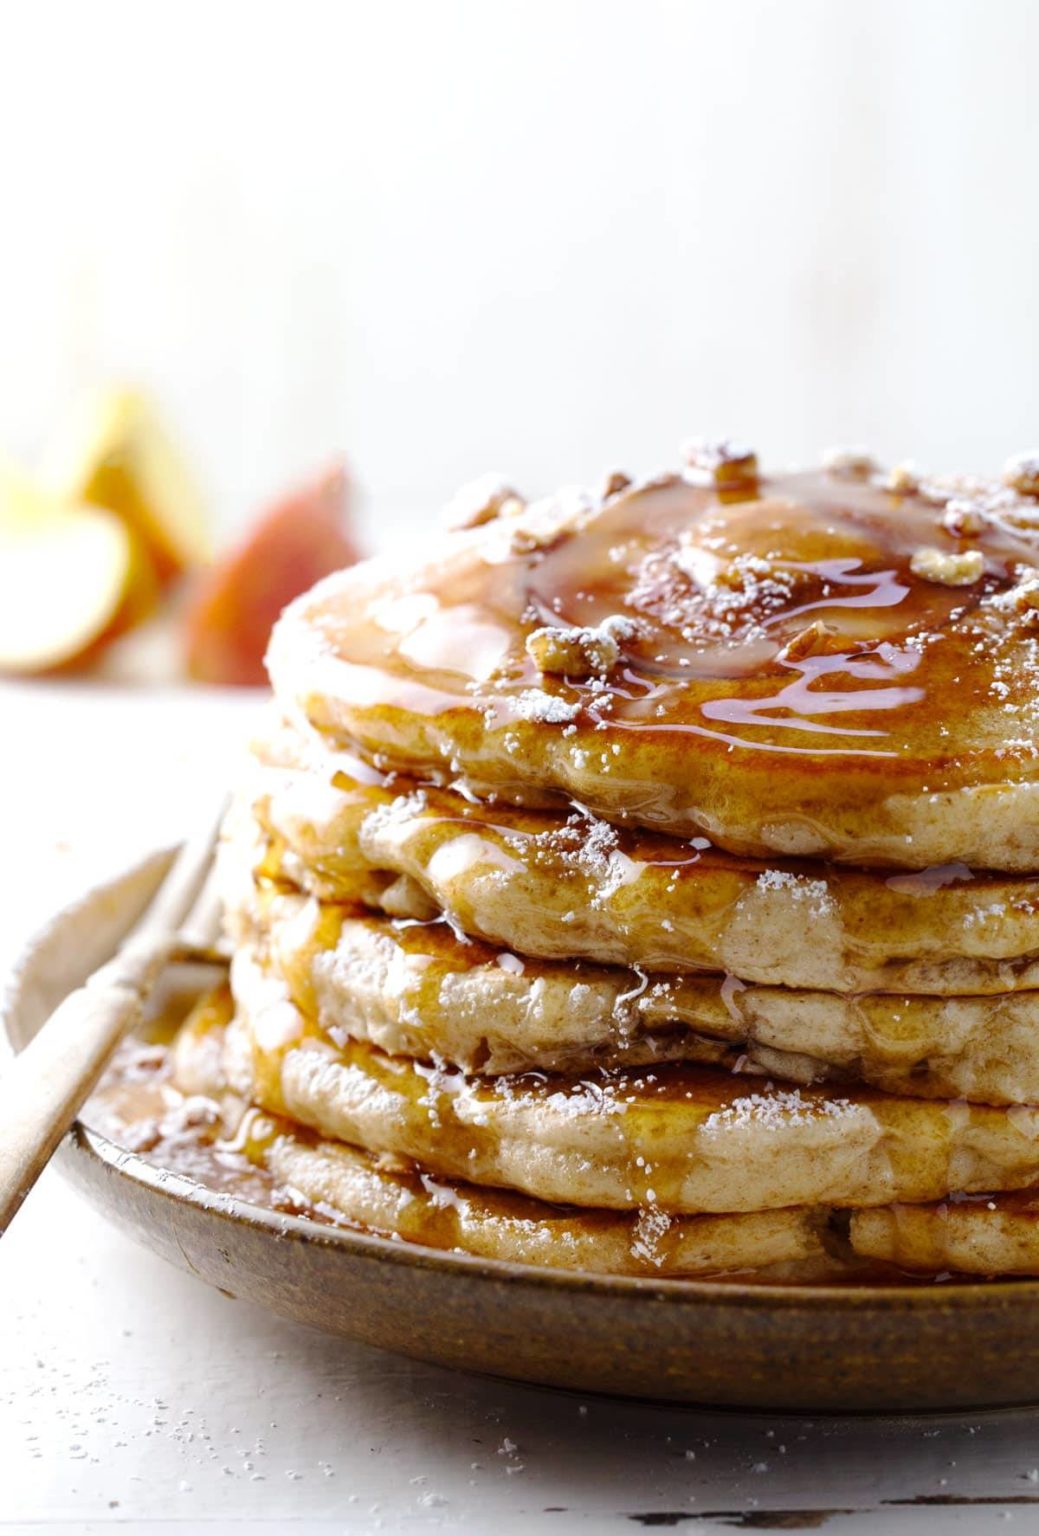 Old Fashioned Whole Wheat Apple Pancakes Recipe - Pinch of Yum